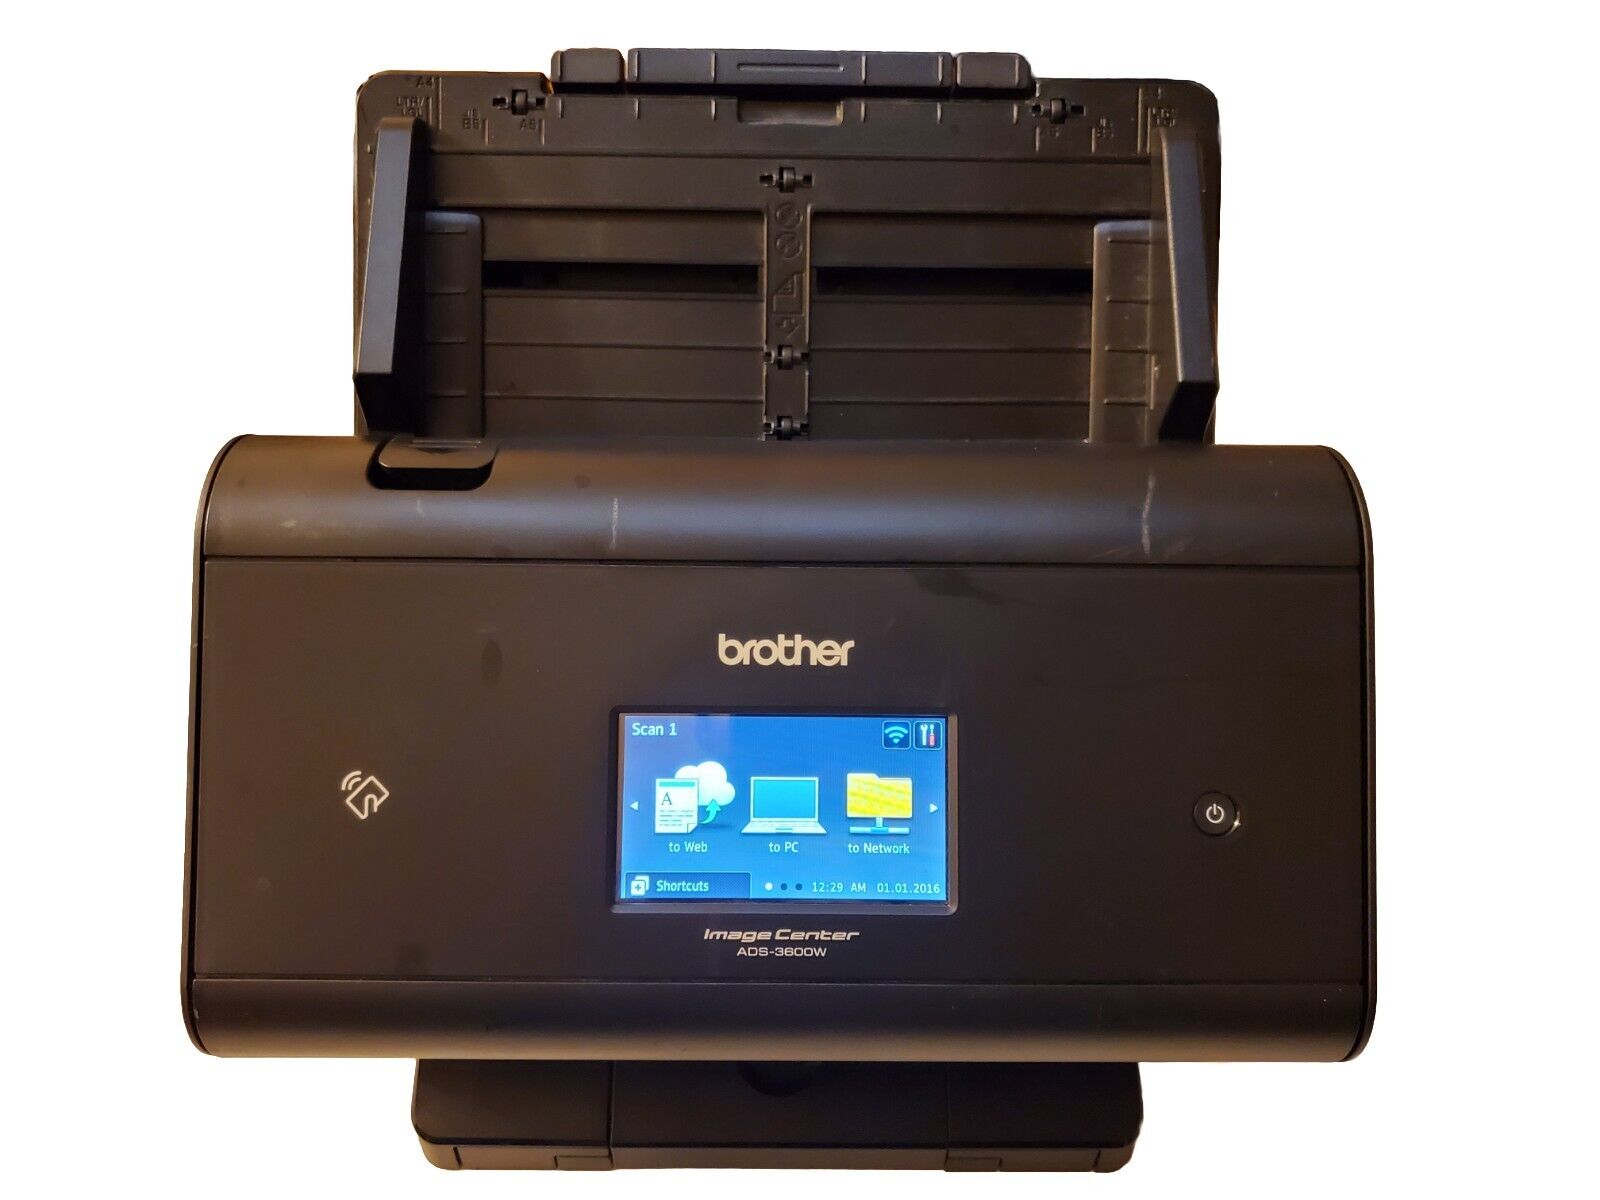 Brother ADS-3600W Image Center High Speed Desktop Document Scanner w/ AC Adapter